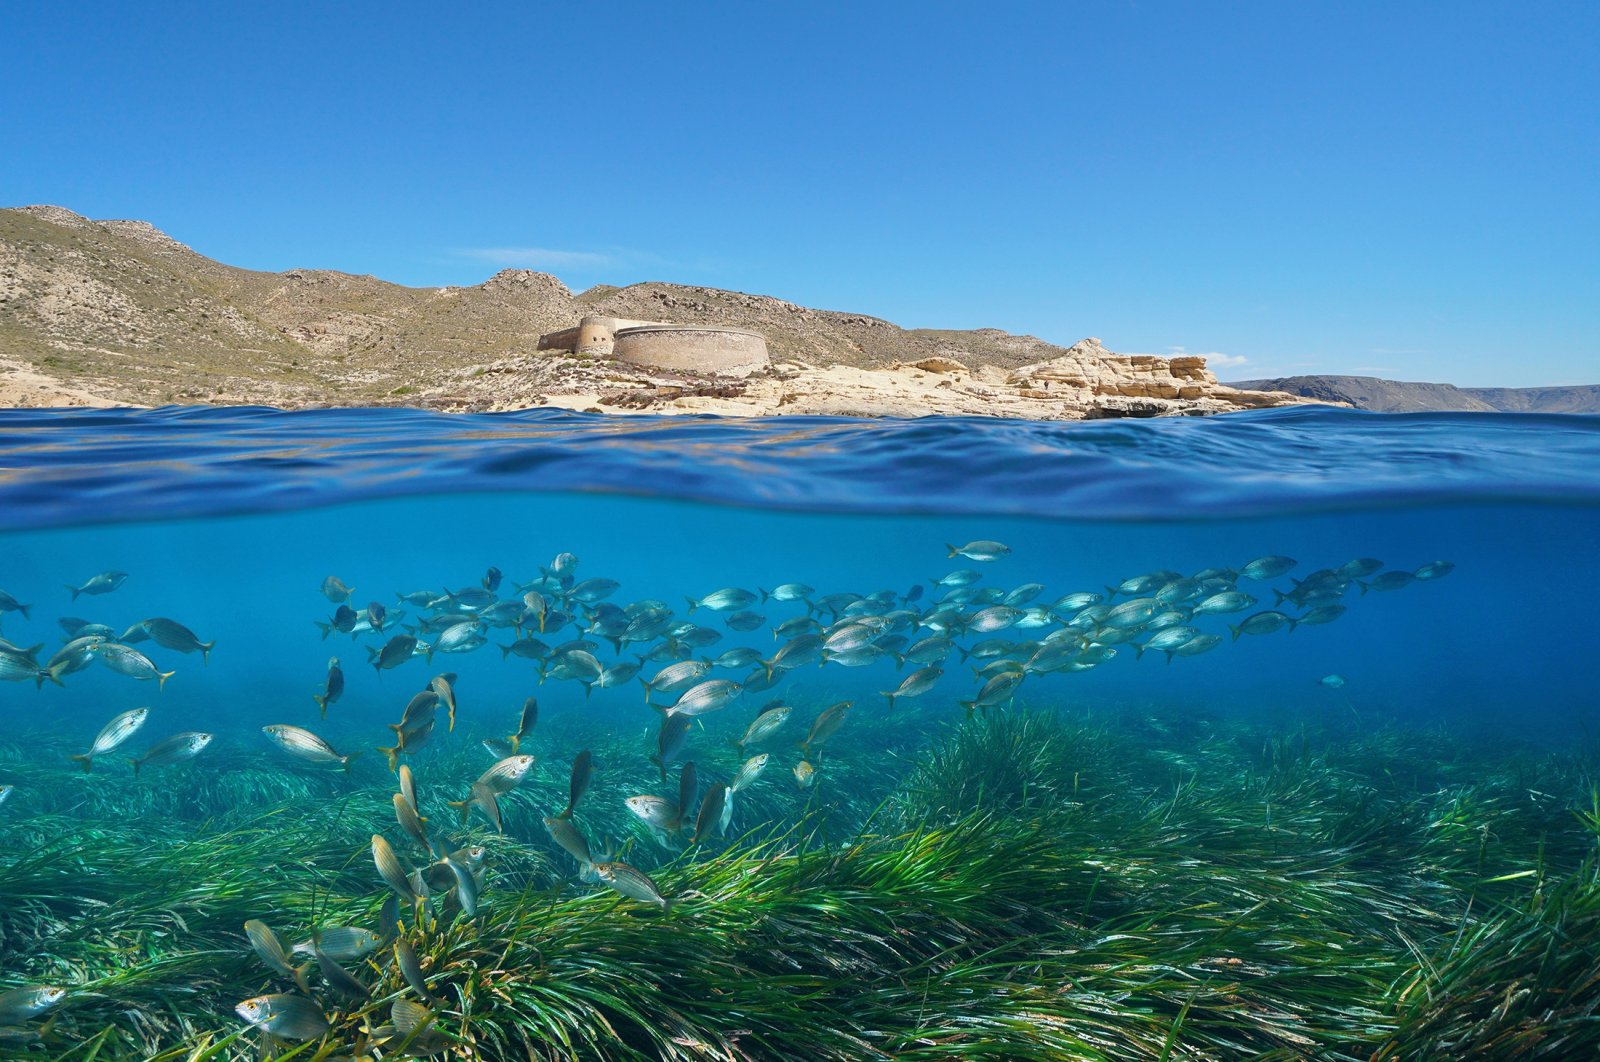 A group of fish swims over Posidonia seagrass with a castle in the background in El Playazo de Rodalquilar, Almeria, Spain. (Shutterstock Photo)